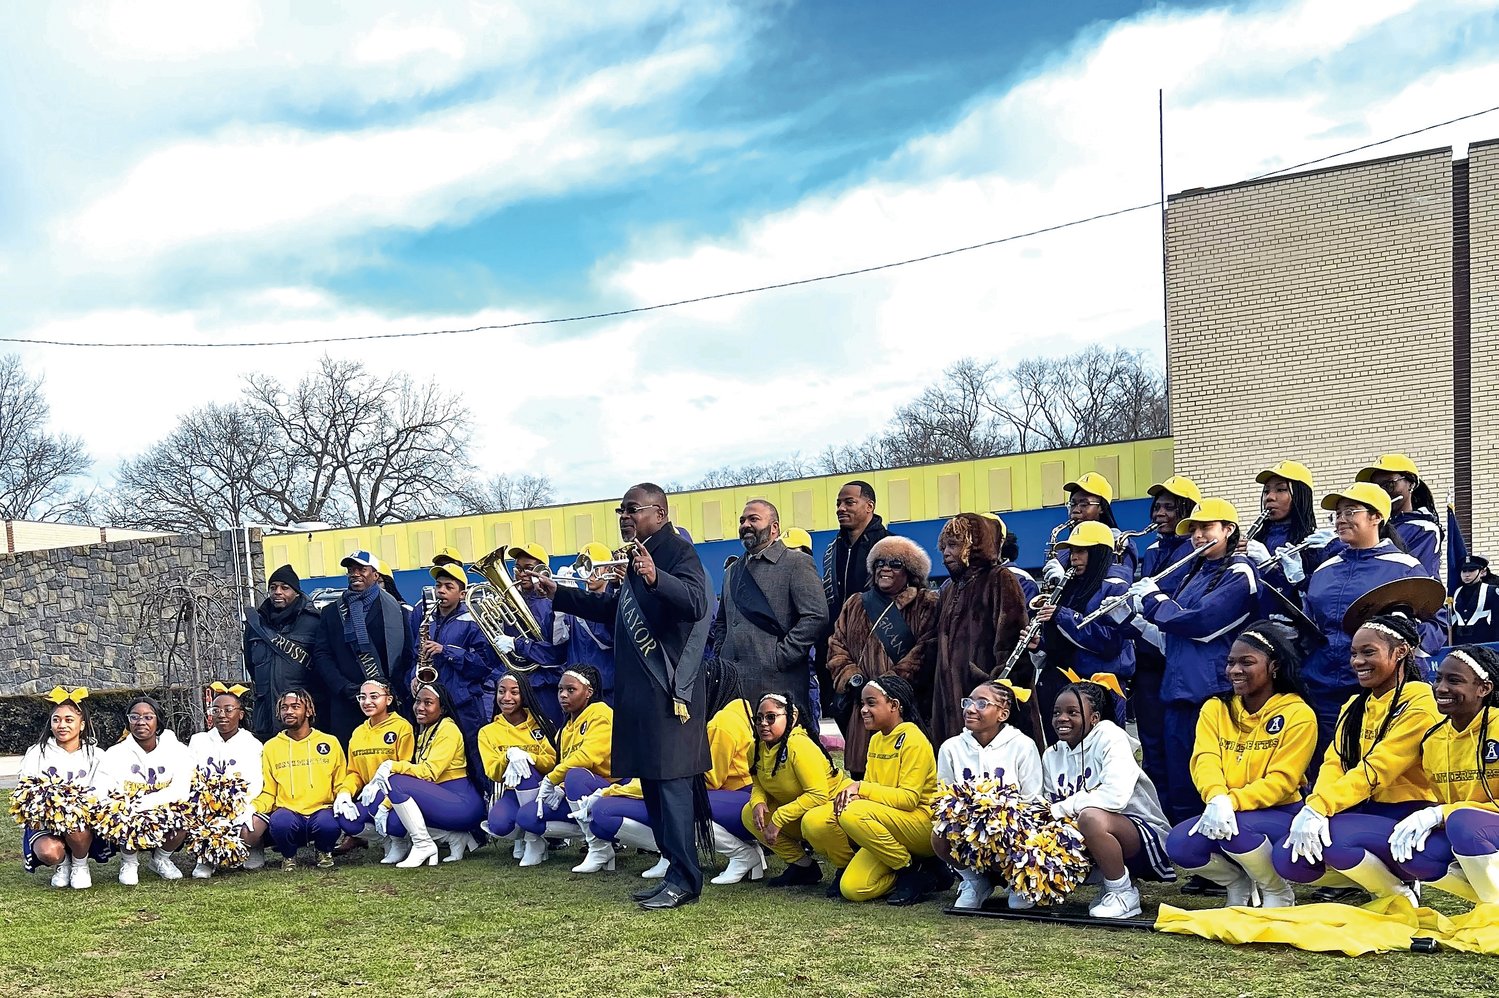 The Academy Marching Panthers, seen here with Mayor Waylyn Hobbs, Jr., New York State Senator Kevin Thomas, Deputy Mayor Jeffery Daniels, and village trustees Kevin Boon and Noah Burroughs, marched in Monday’s MLK Day parade.